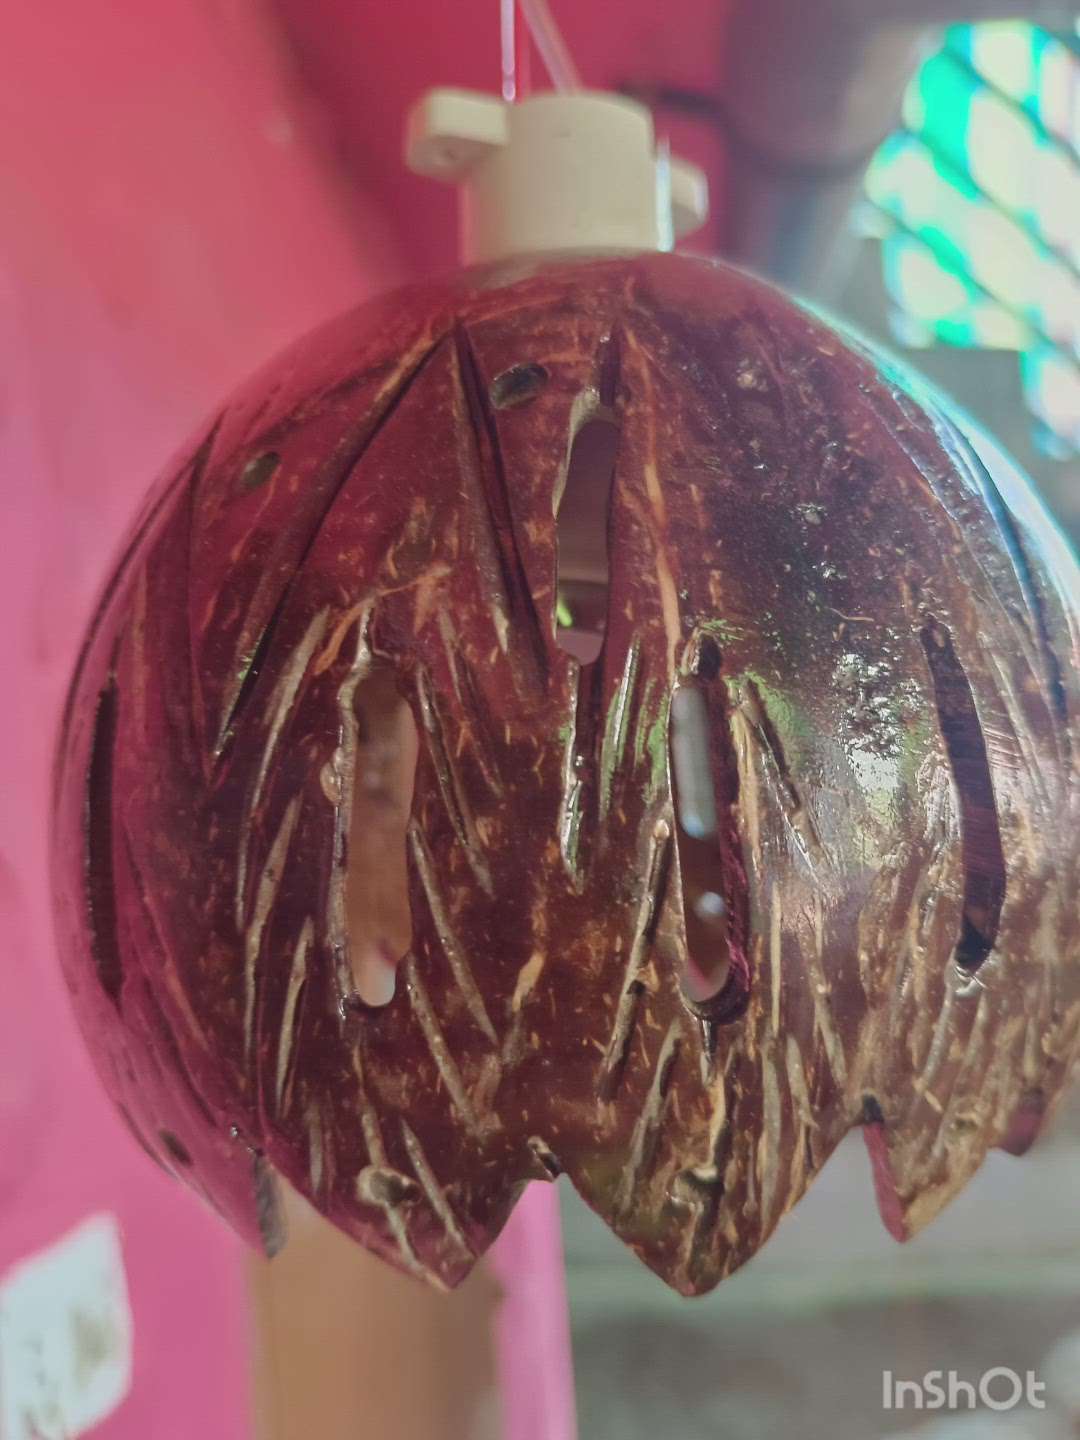 #200₹
#coconut carving  show  light  shal  carving